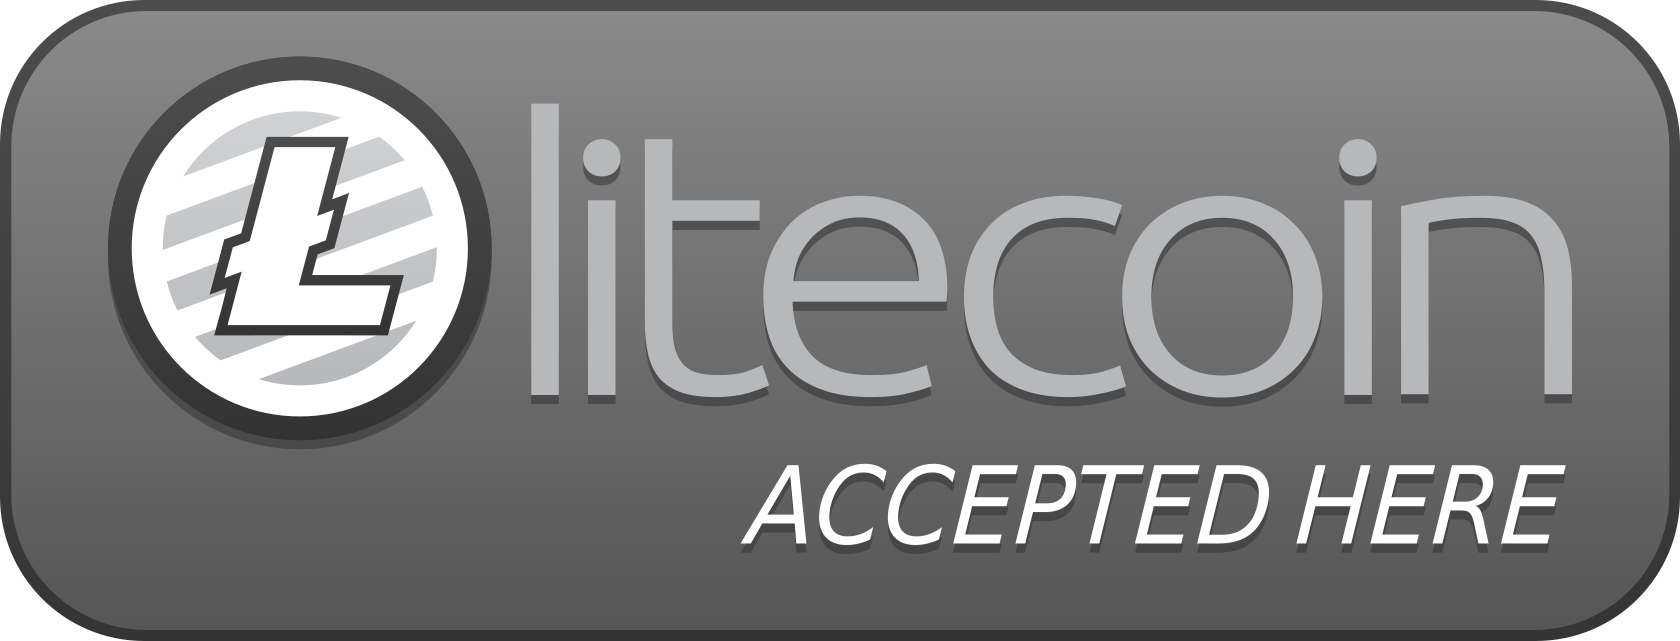 litecoin-accepted-here-02.png